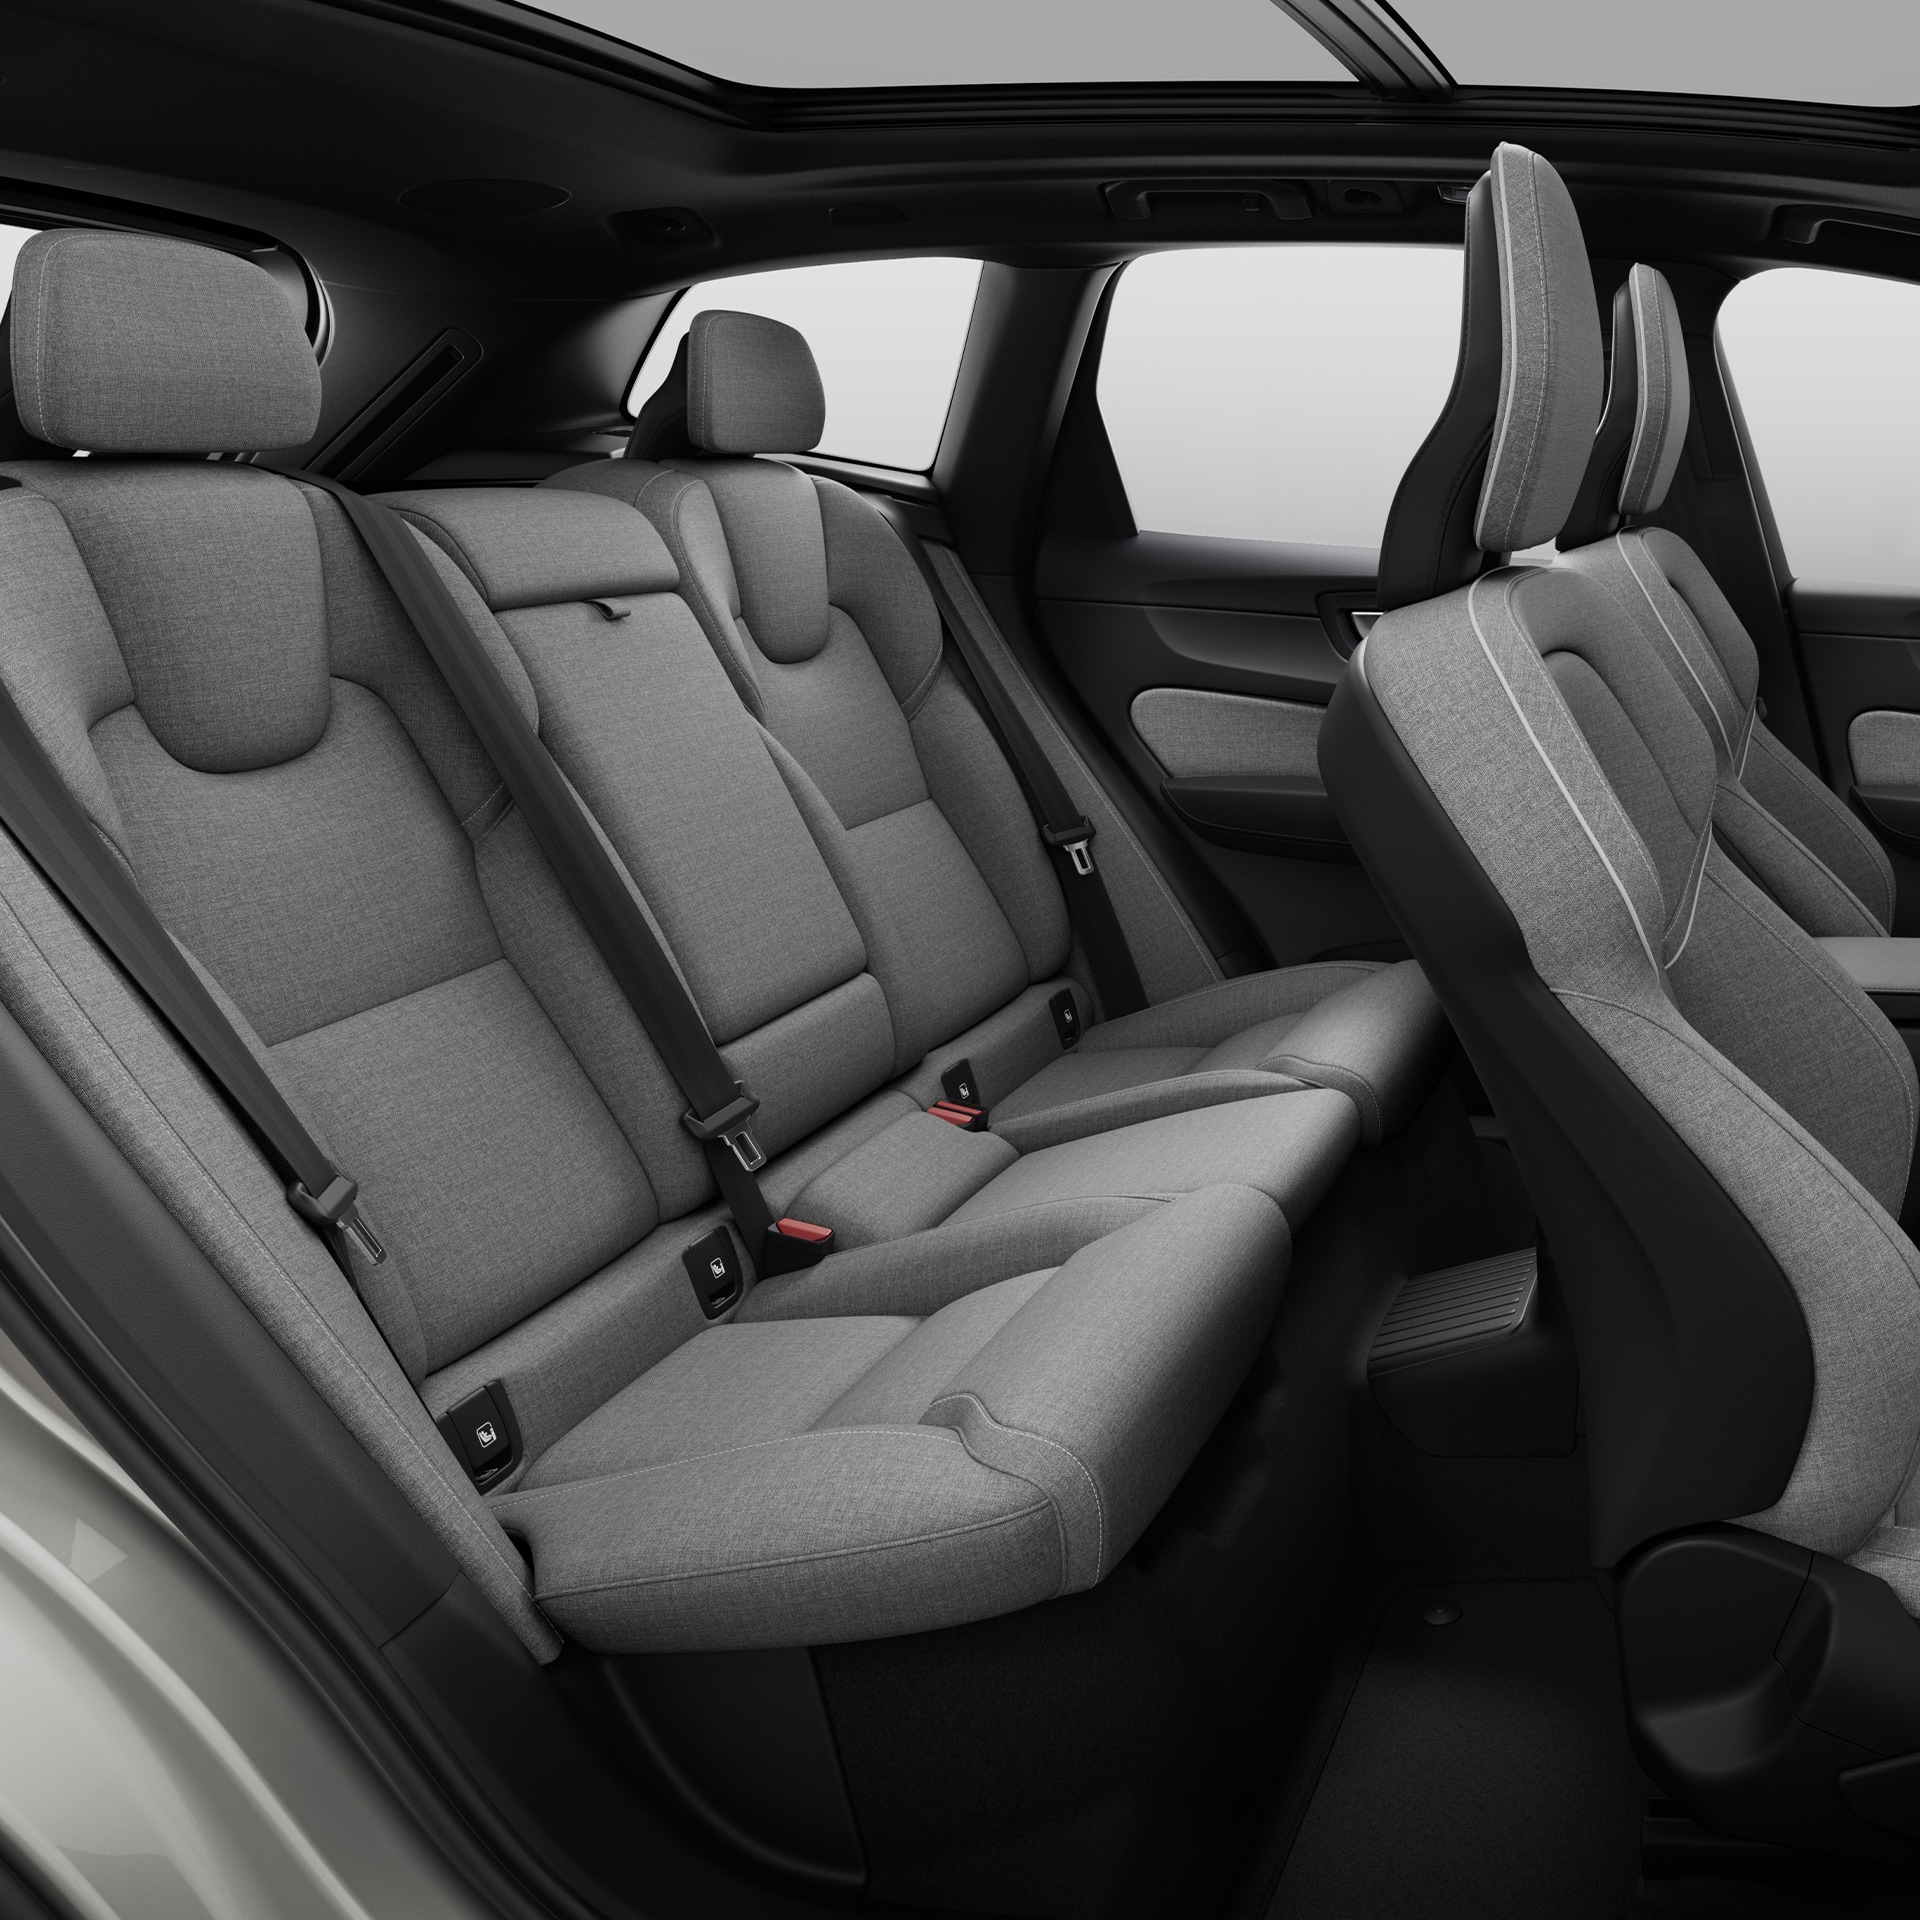 Side view of interior of Volvo XC60 Recharge.